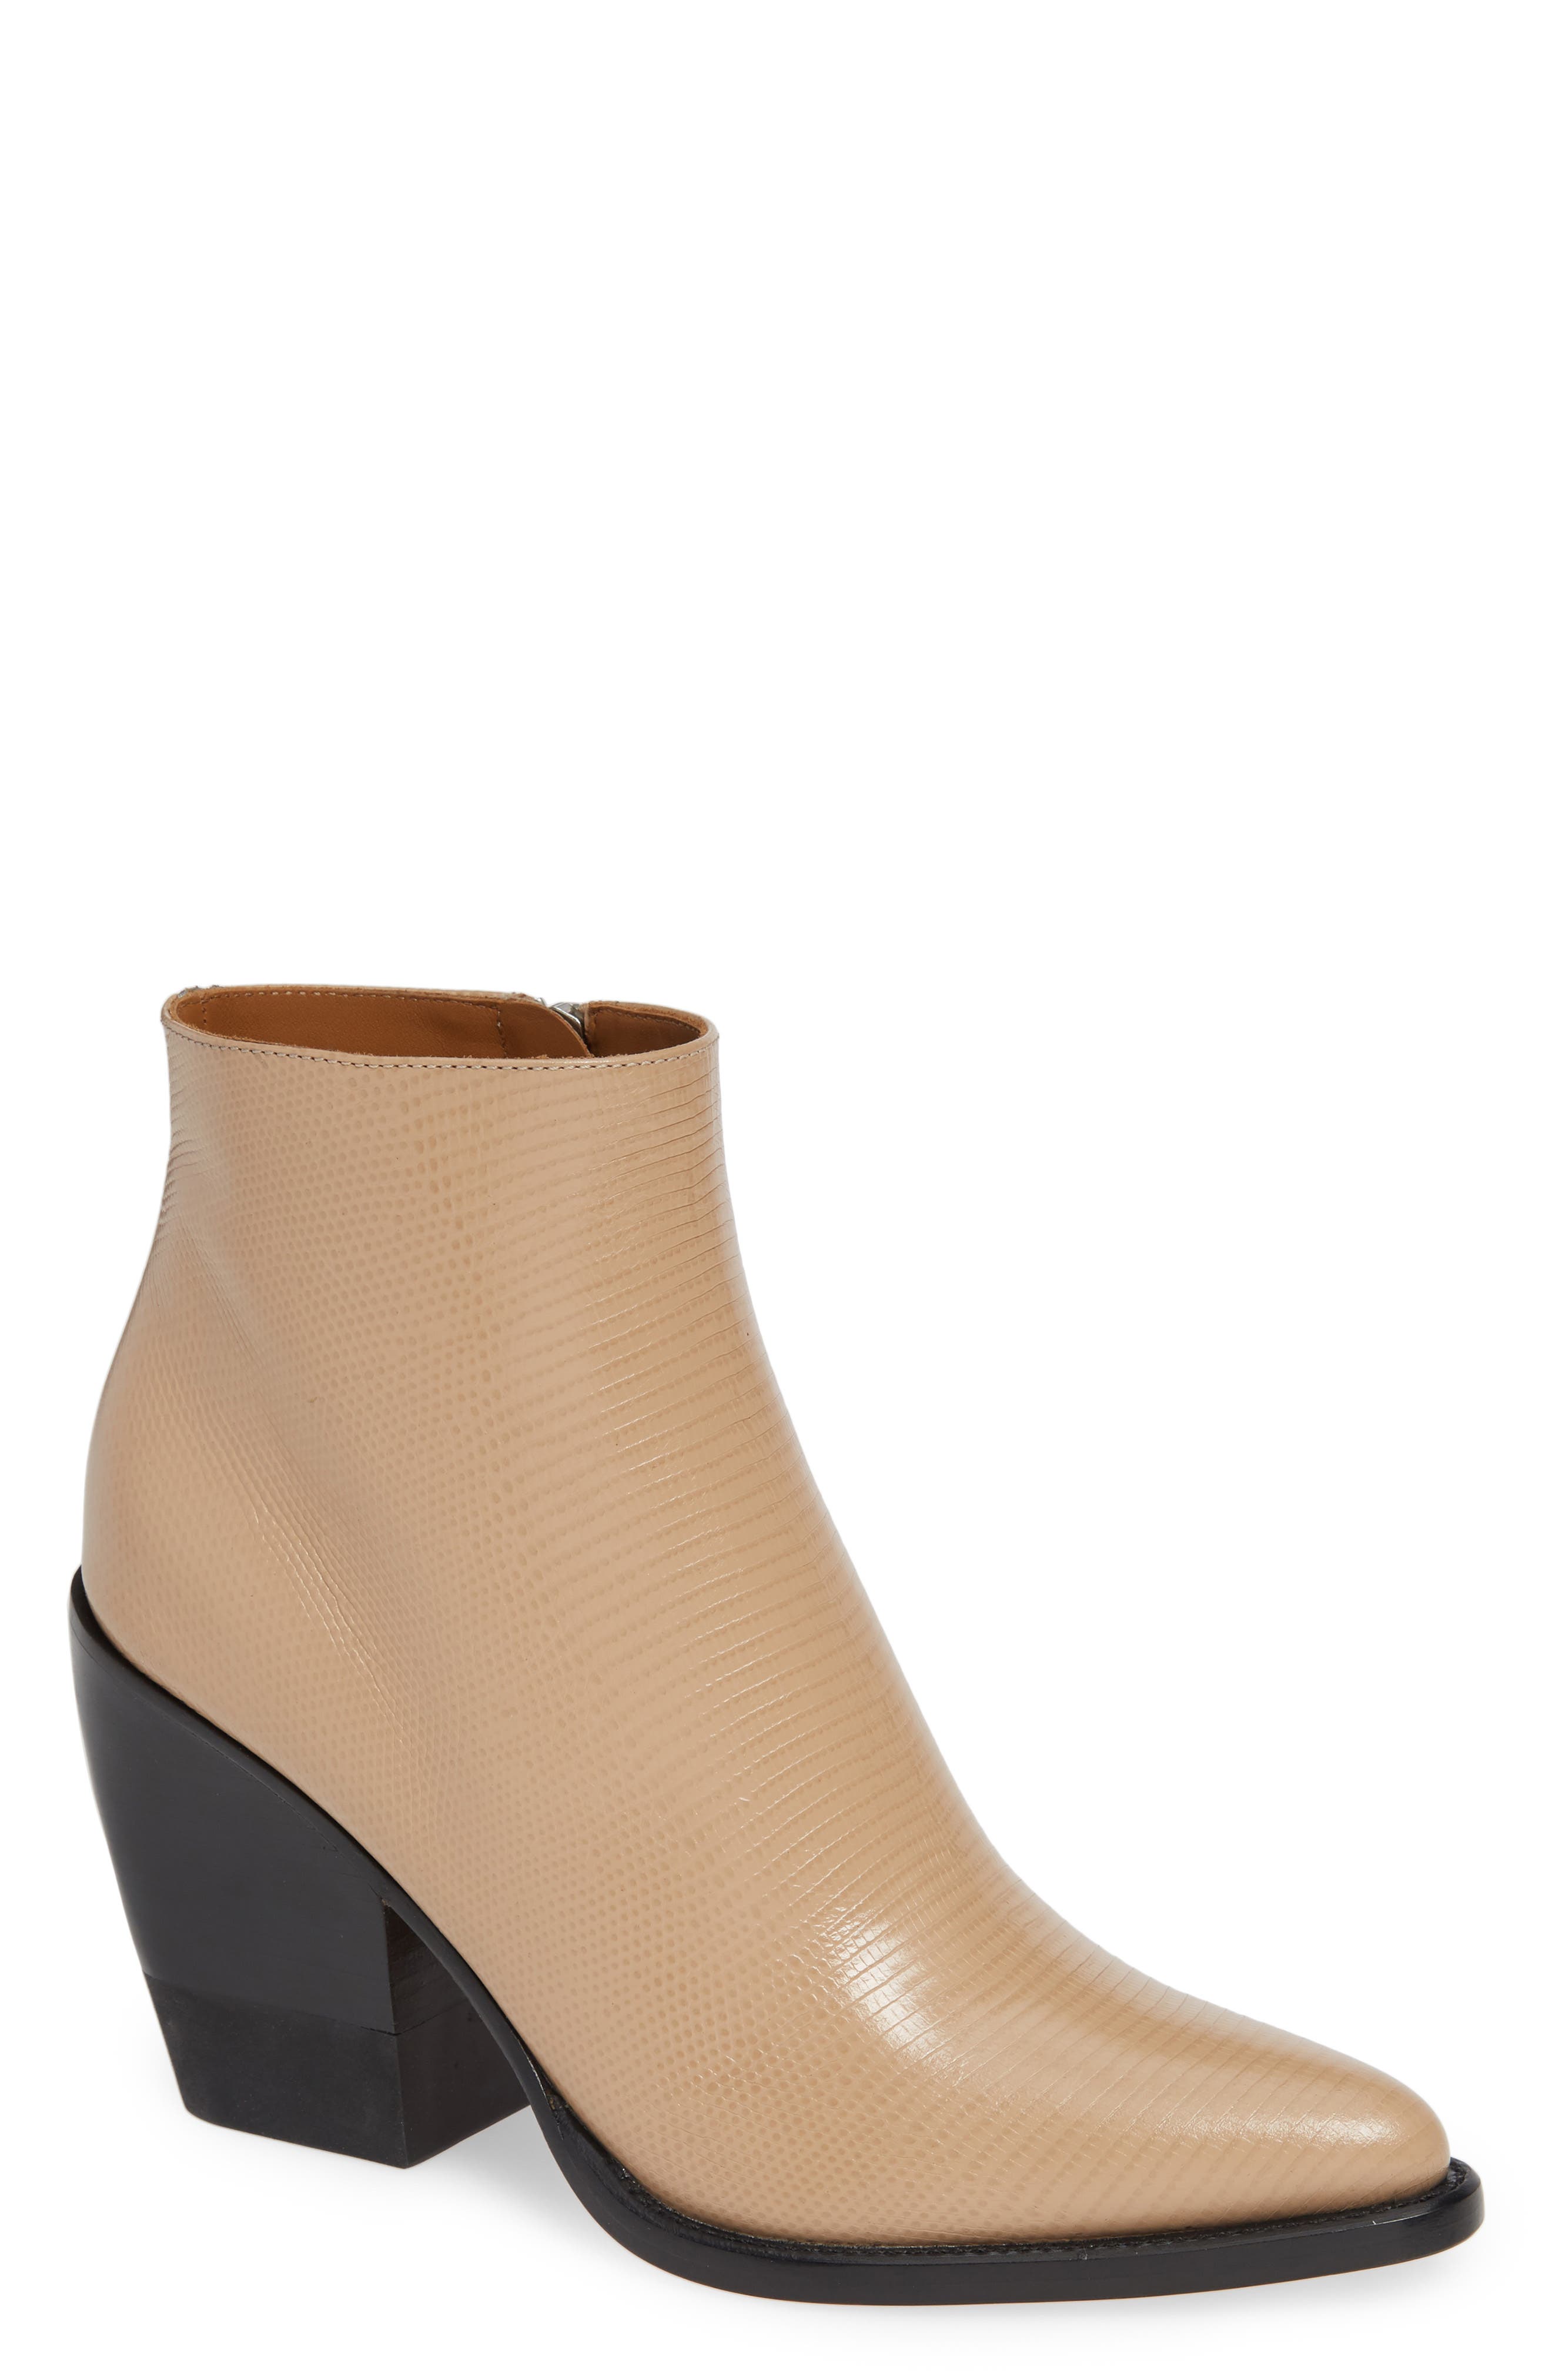 chloe ankle boots rylee